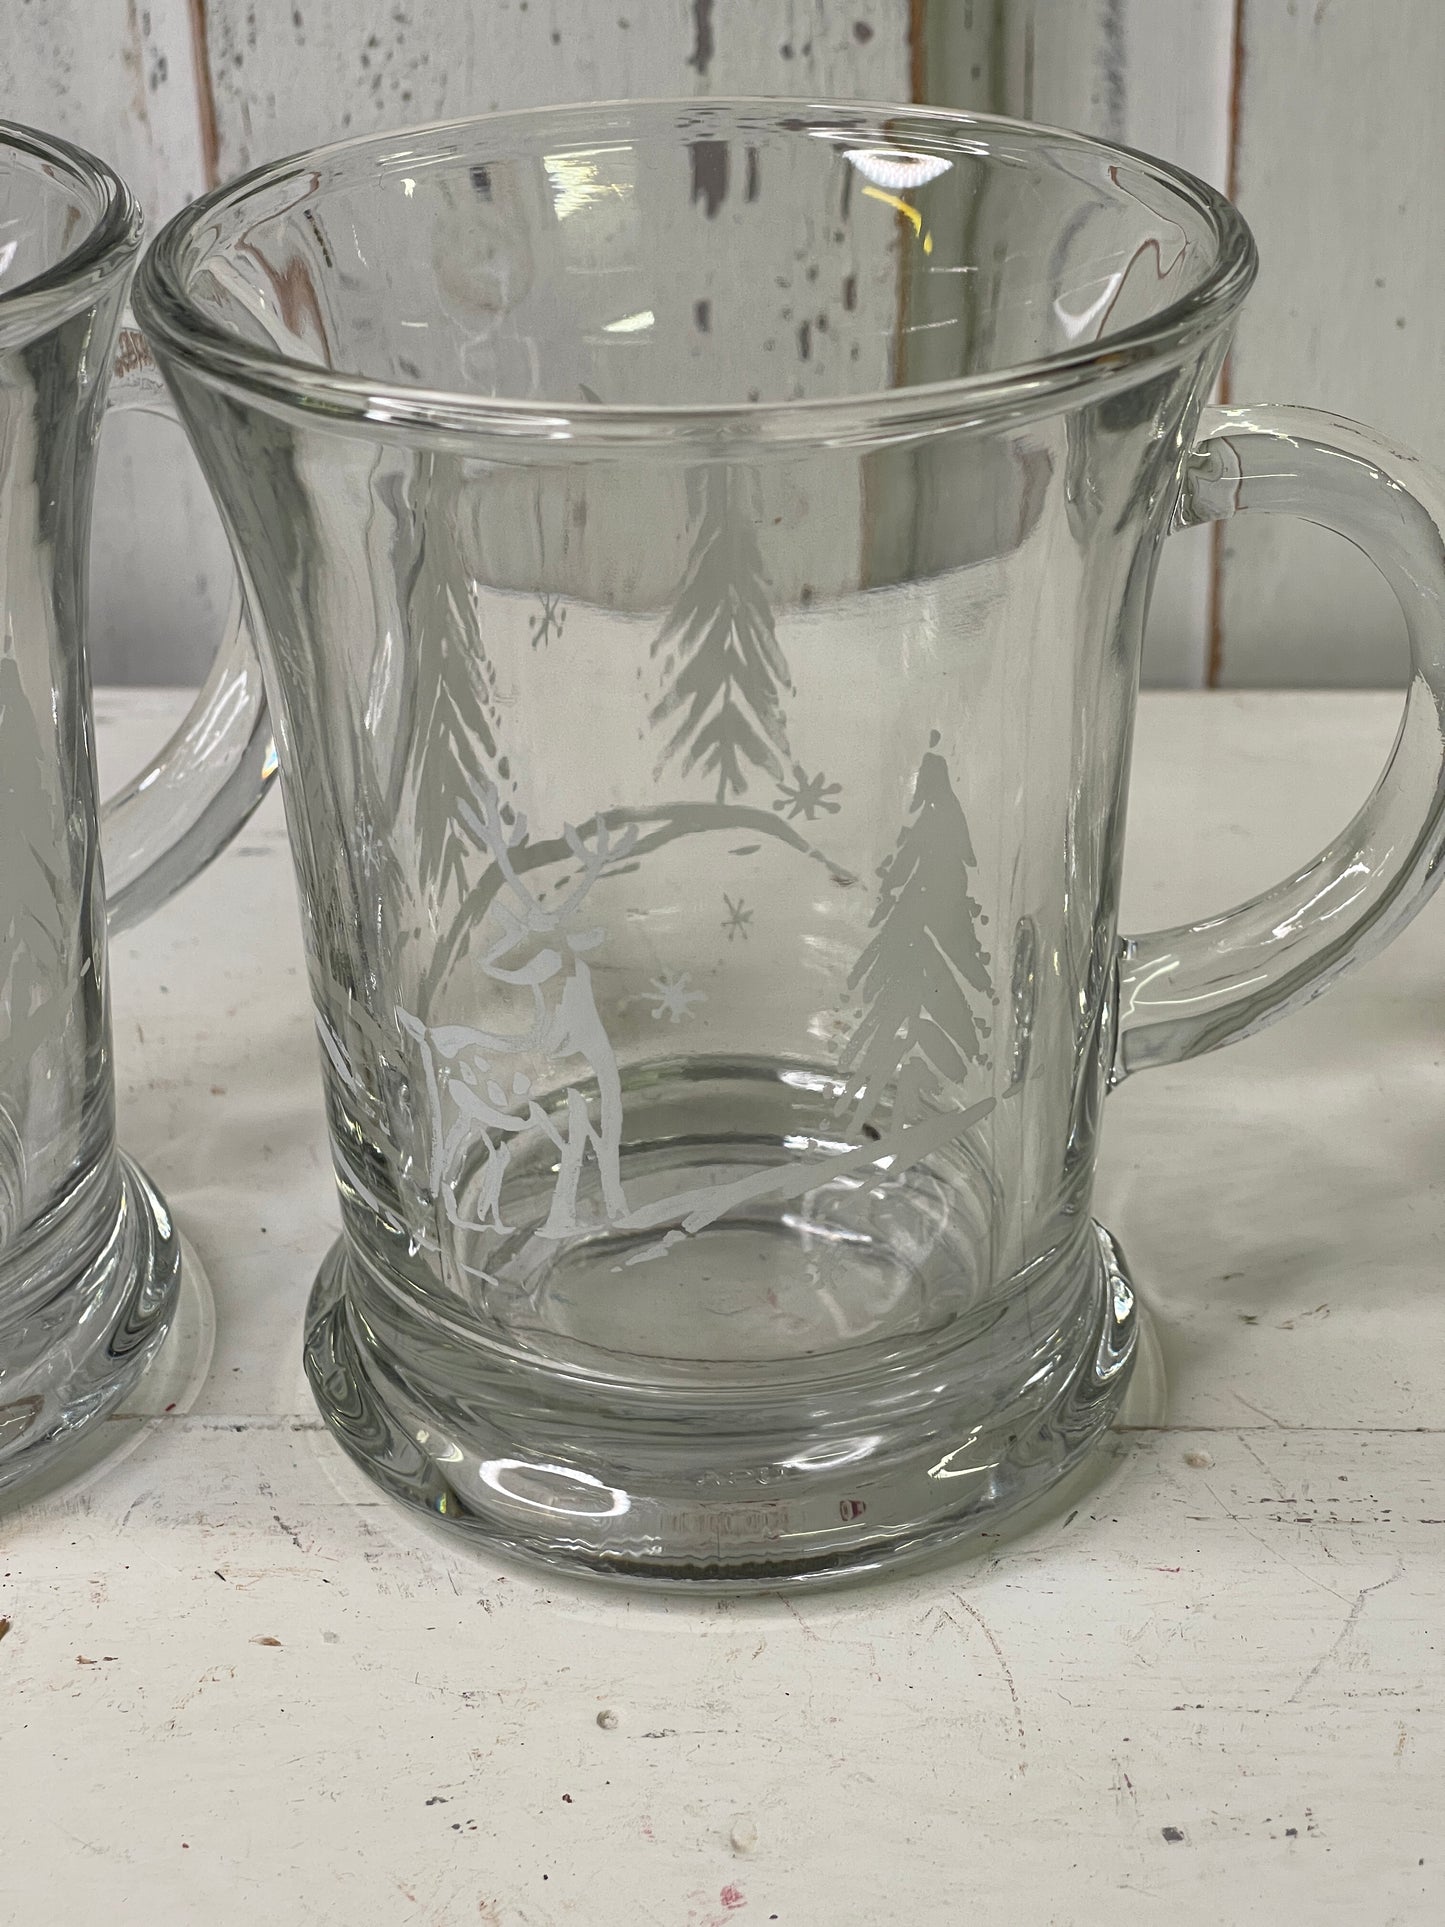 Set of 2 Glass Mugs with Handles Embossed with Deer and Trees | Christmas Decor